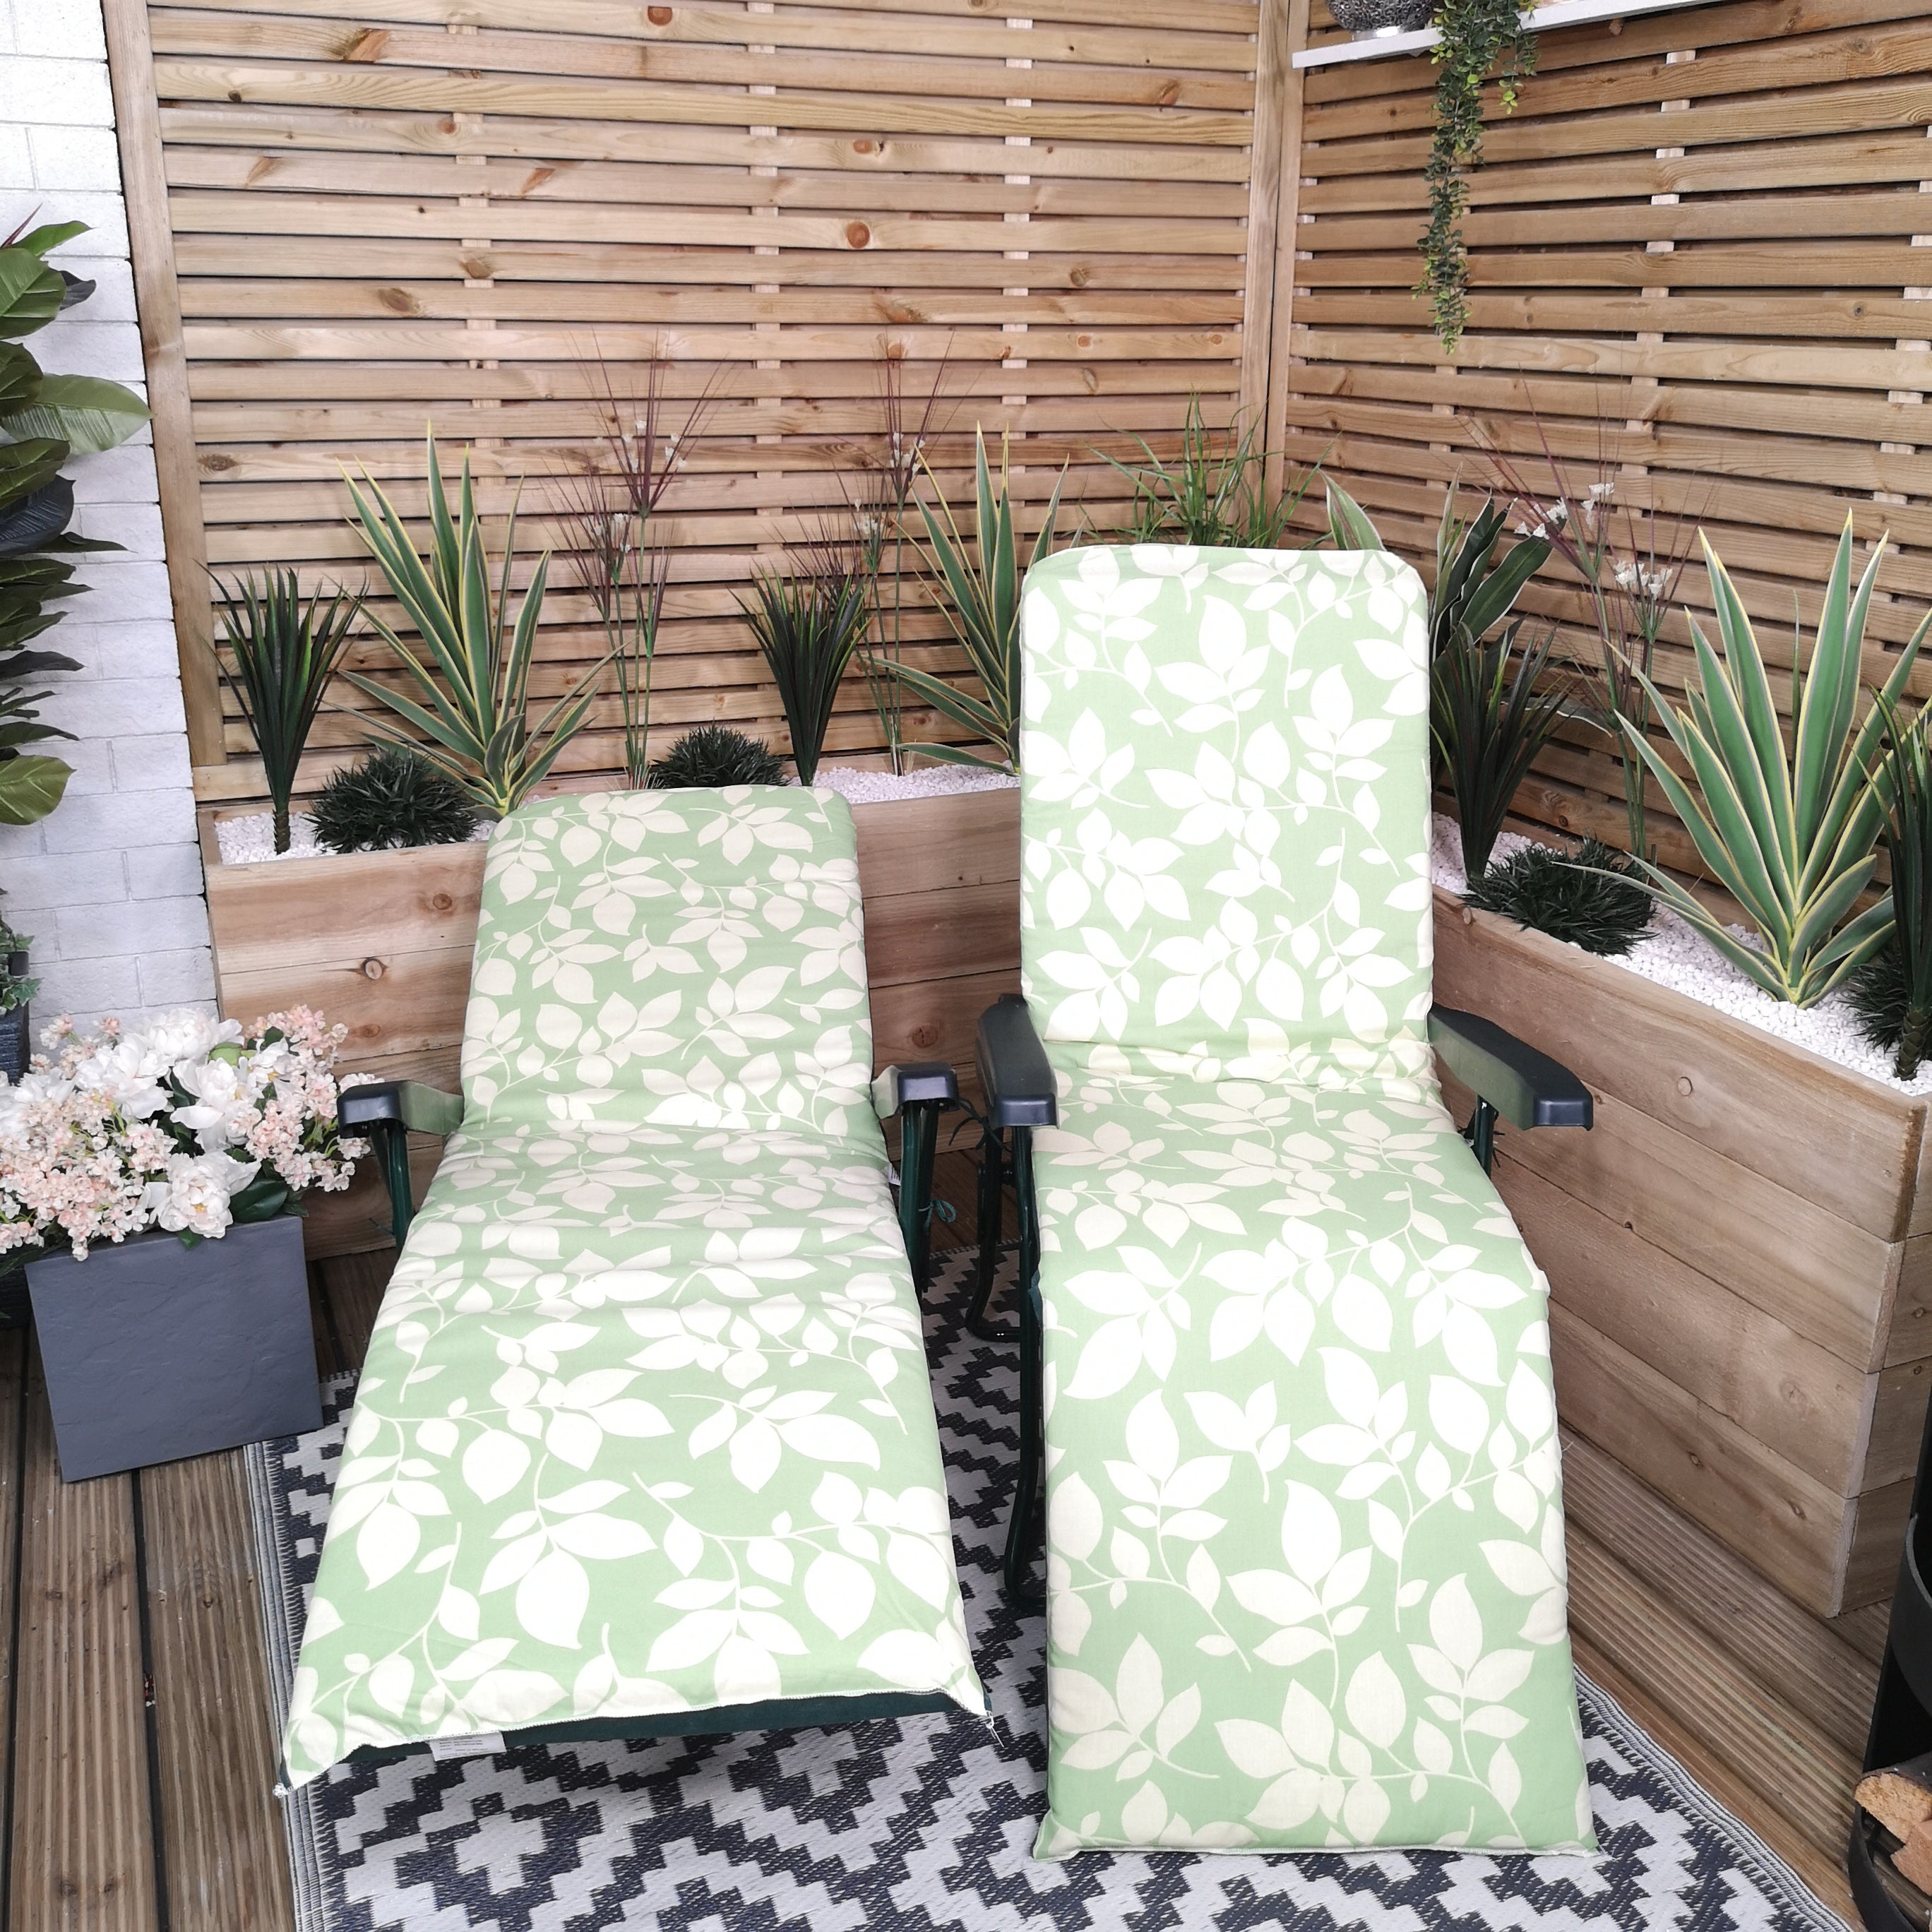 Set of 2 Padded Outdoor Garden Patio Recliner / Sun Lounger Green with Leaf Pattern